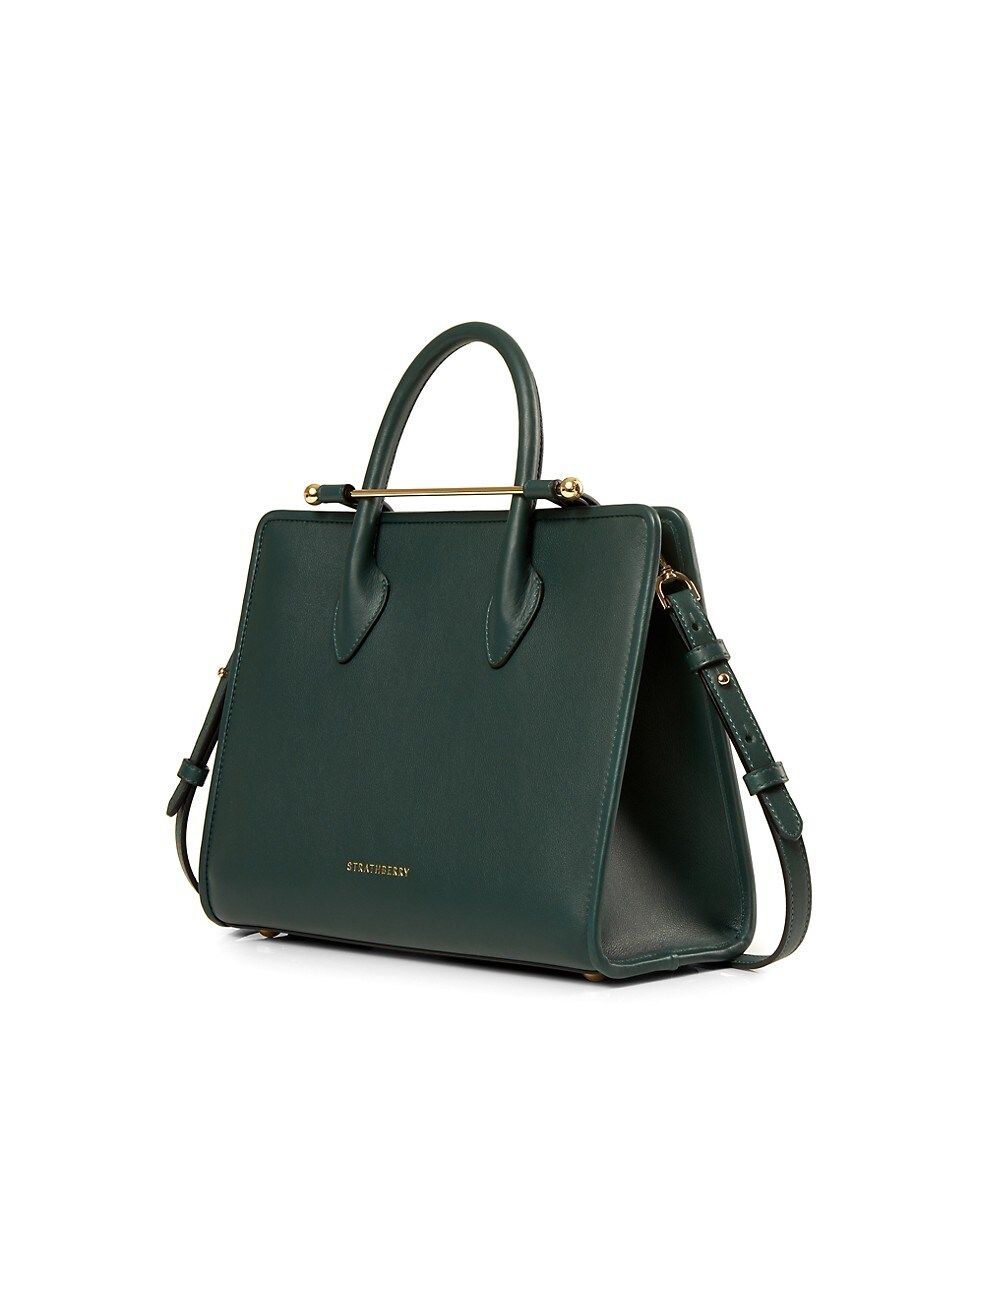 Strathberry Midi Leather Tote | Saks Fifth Avenue